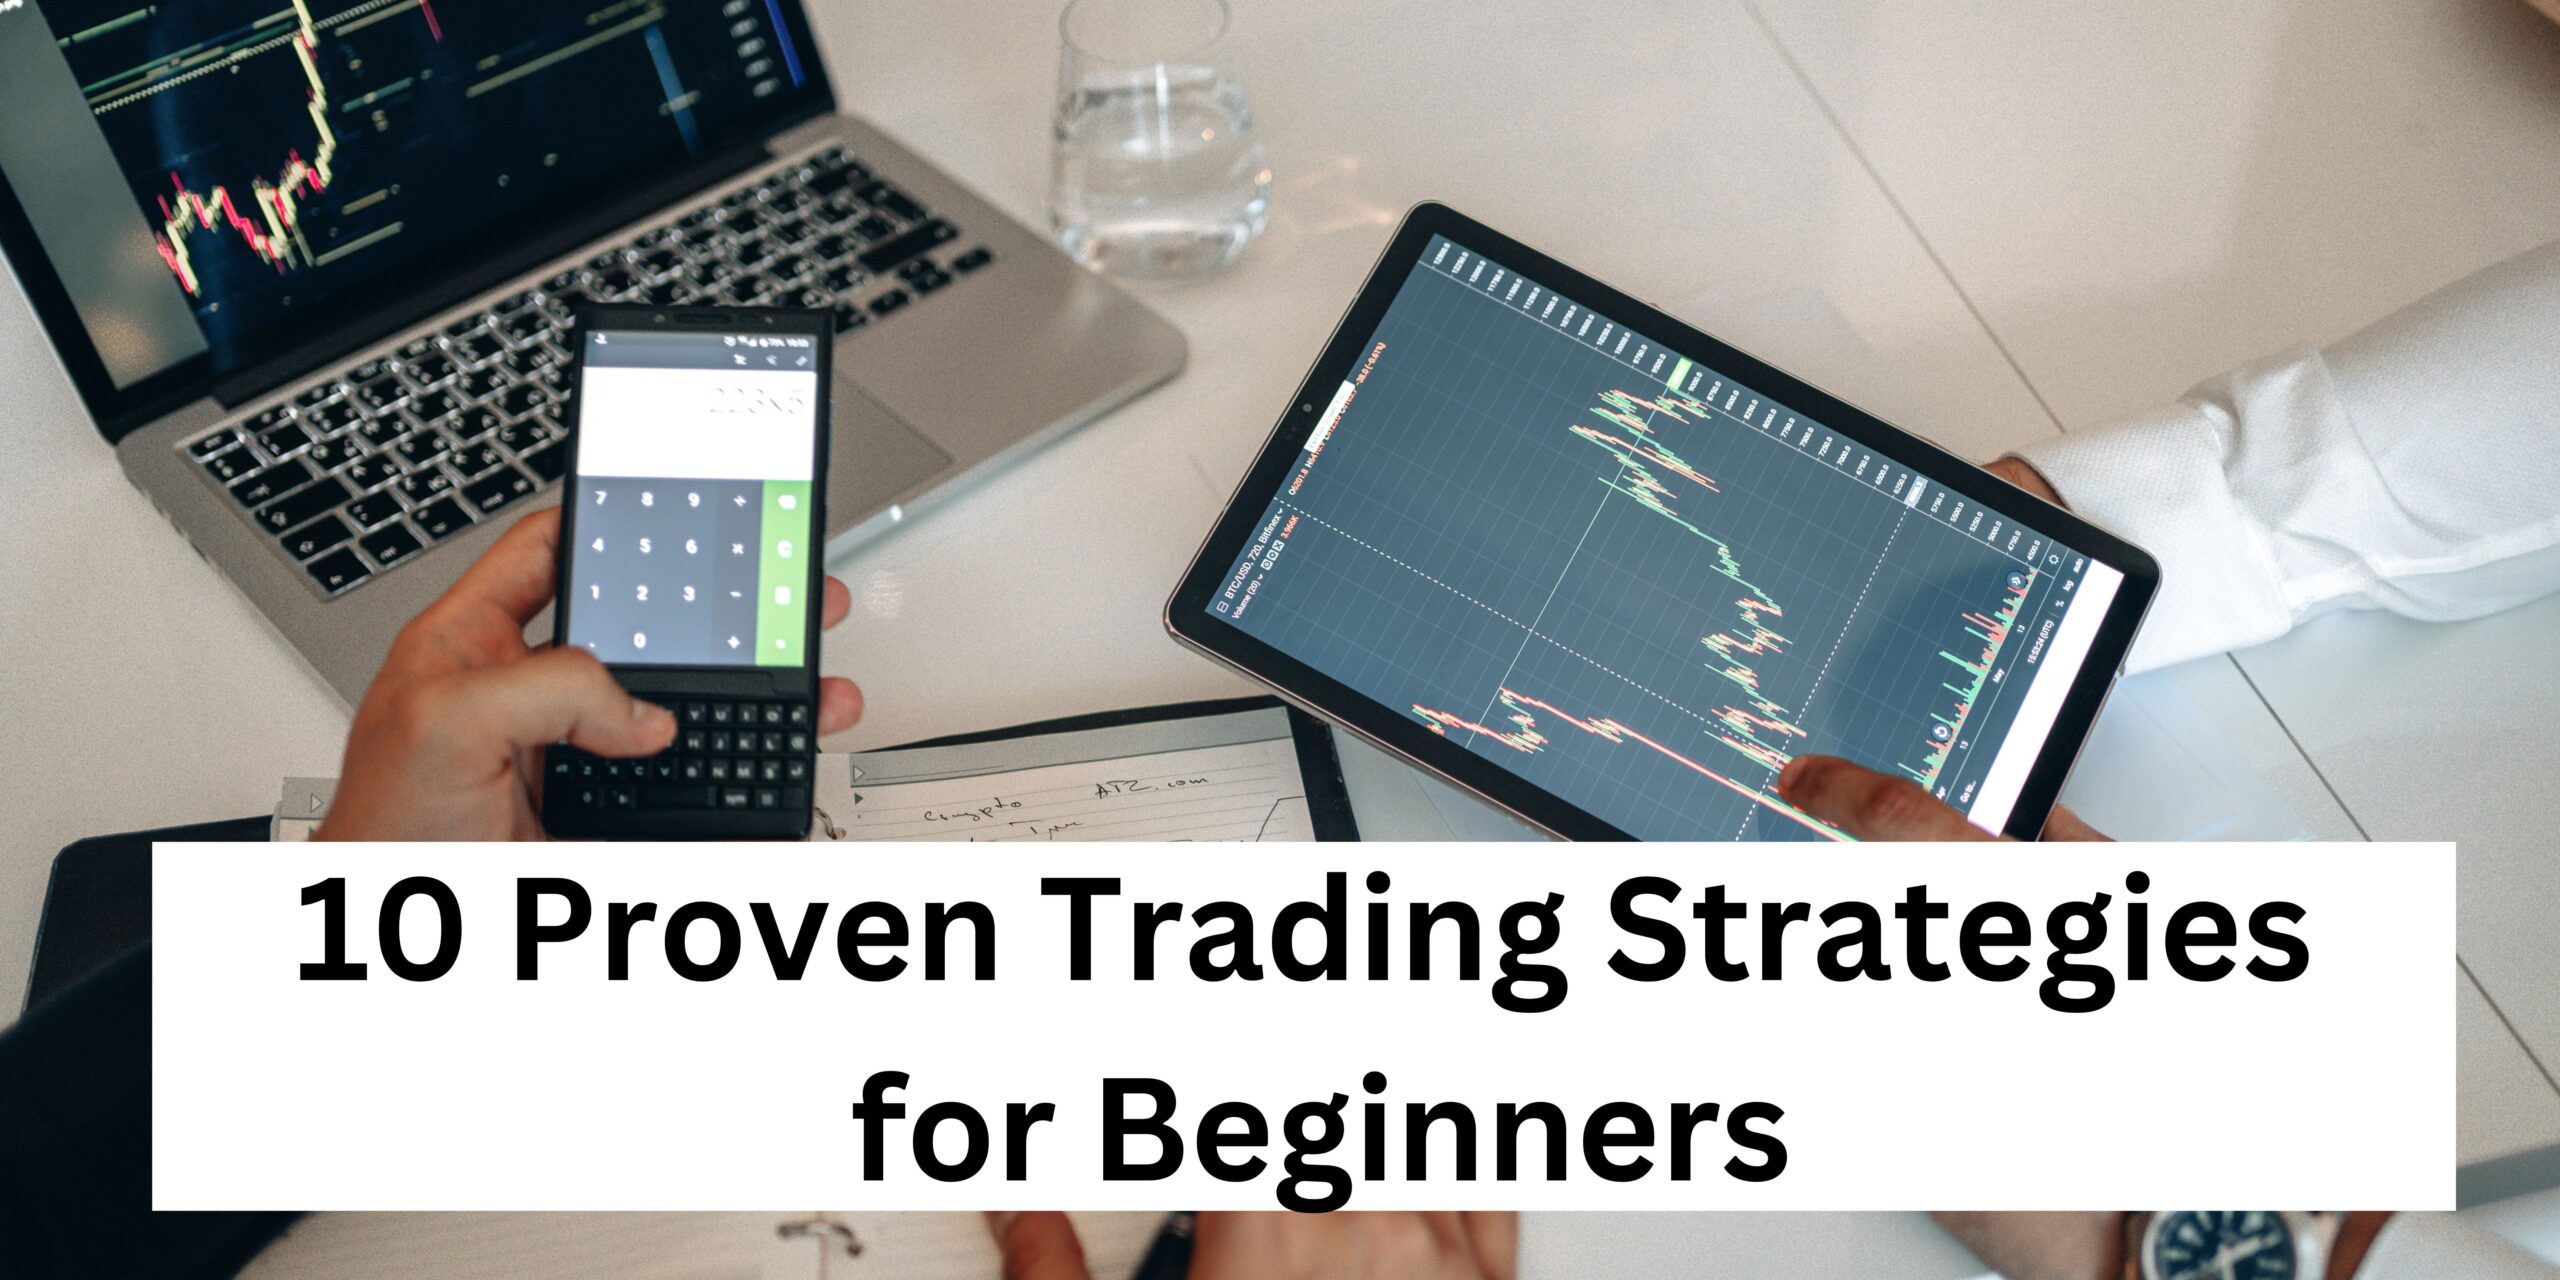 10 Proven Trading Strategies for Beginners